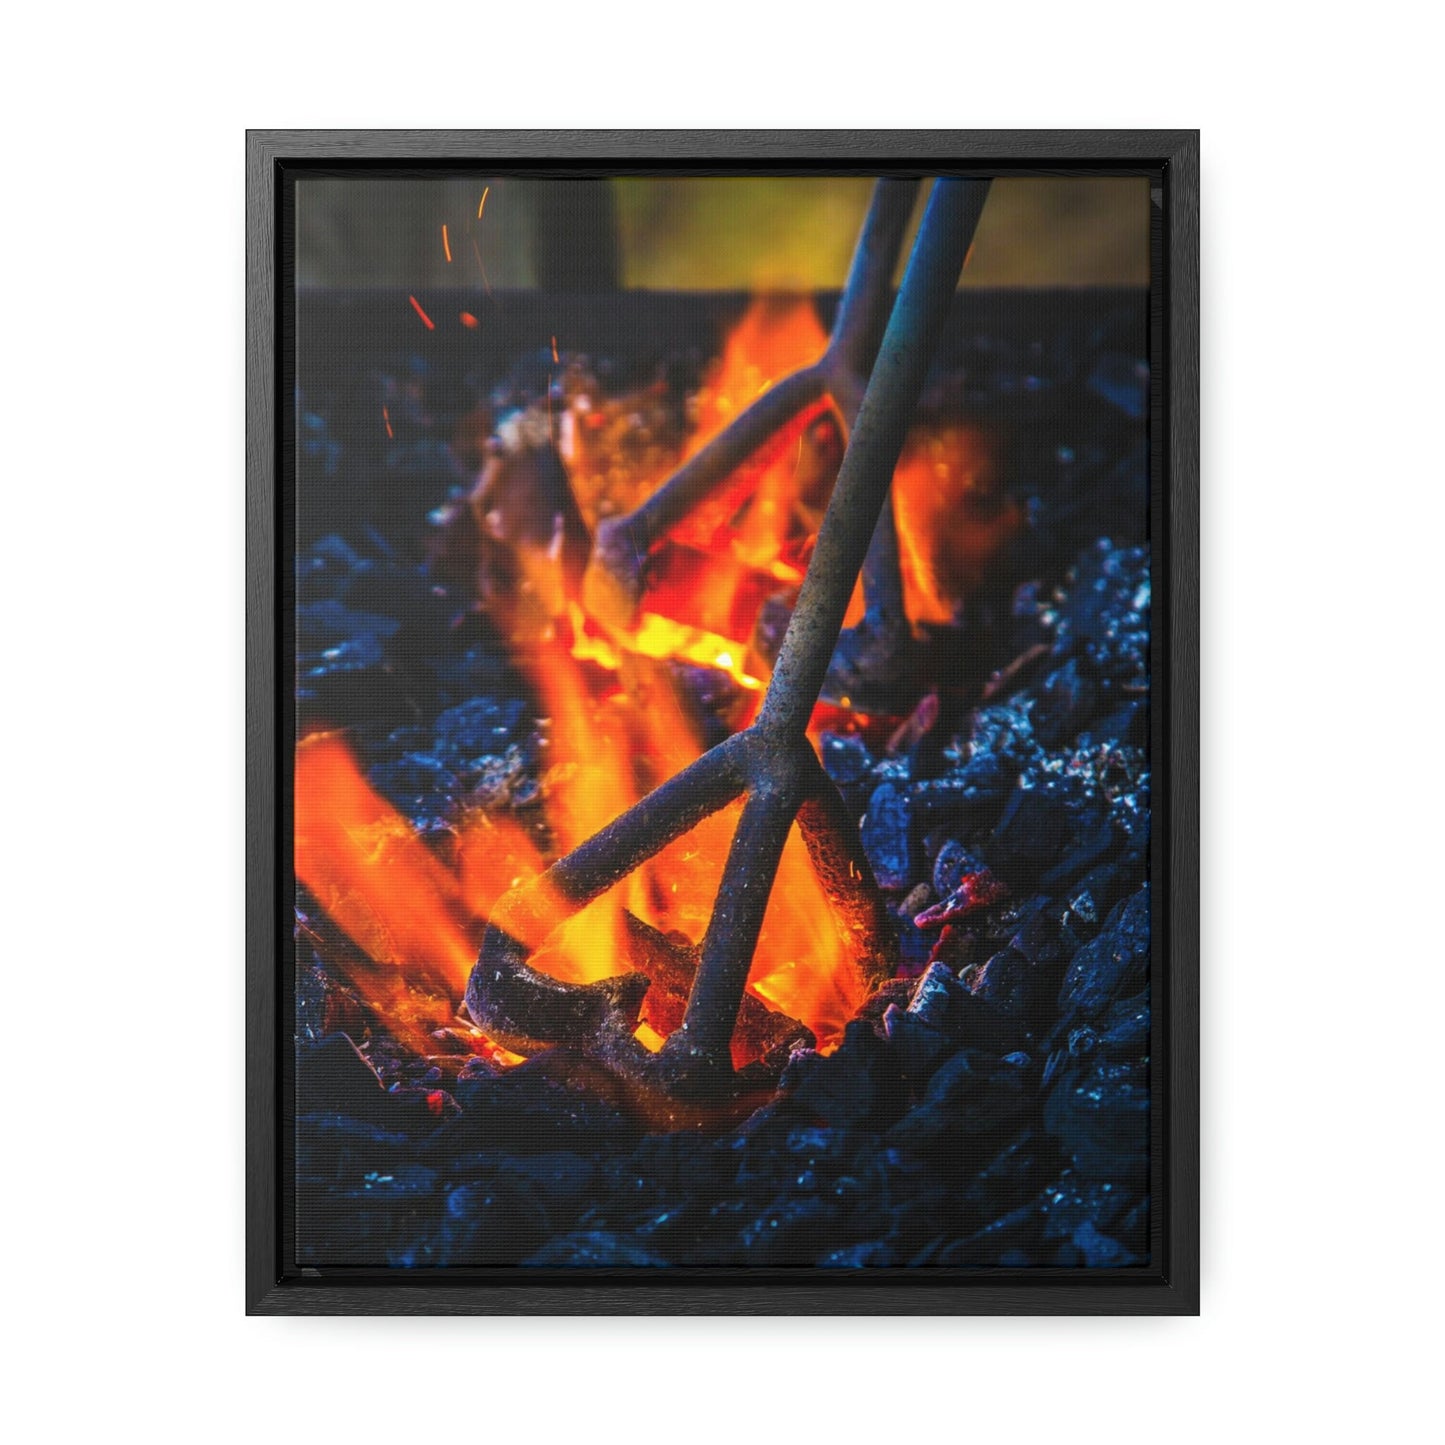 Cattle Branding Irons in Wood Fire Stretched Canvas